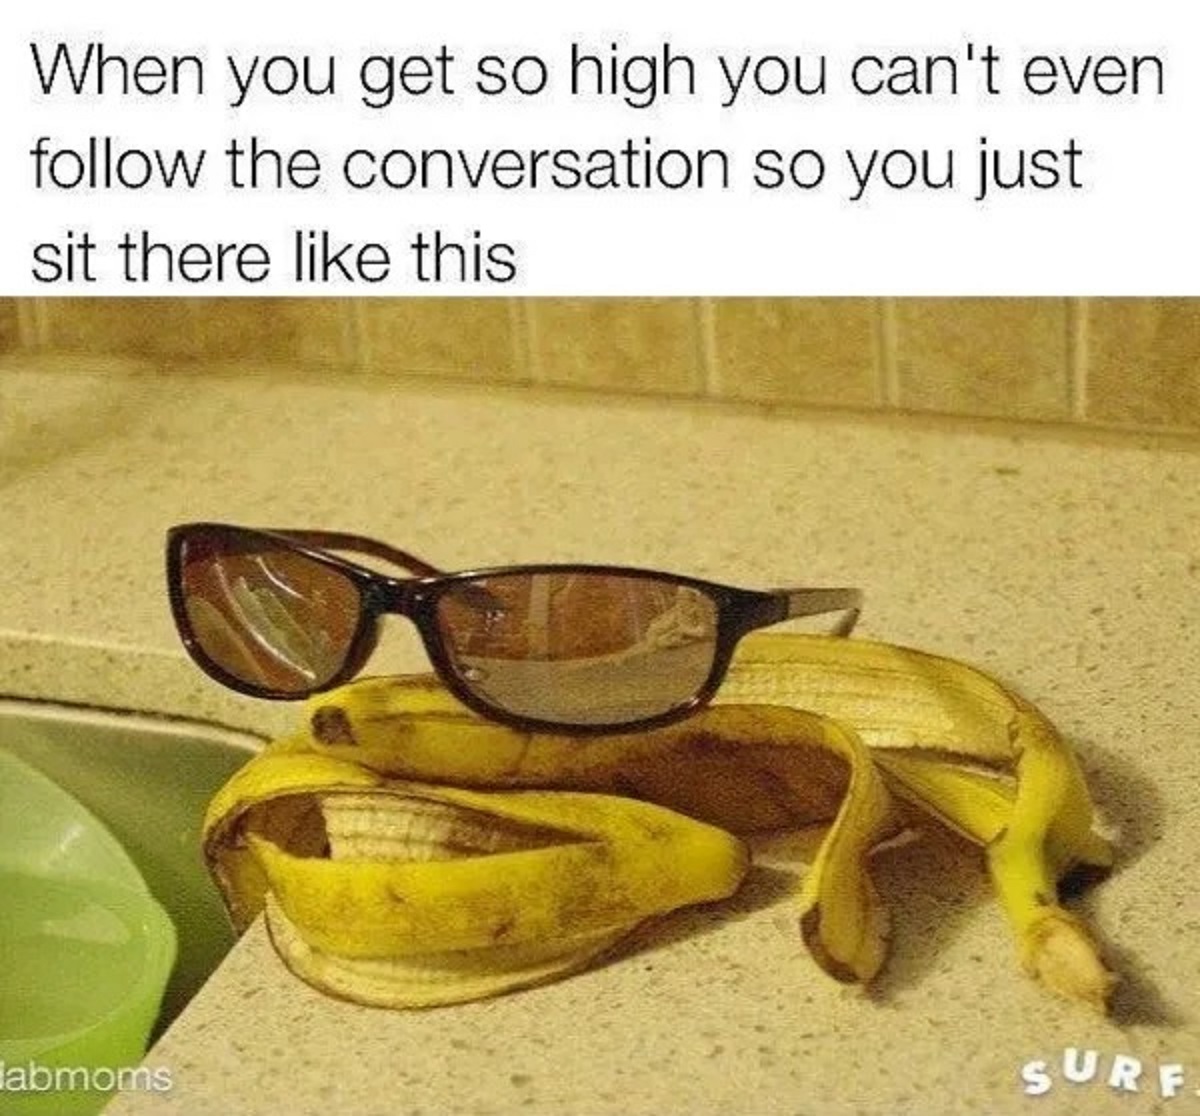 banana memes - When you get so high you can't even the conversation so you just sit there this labmoms Surf